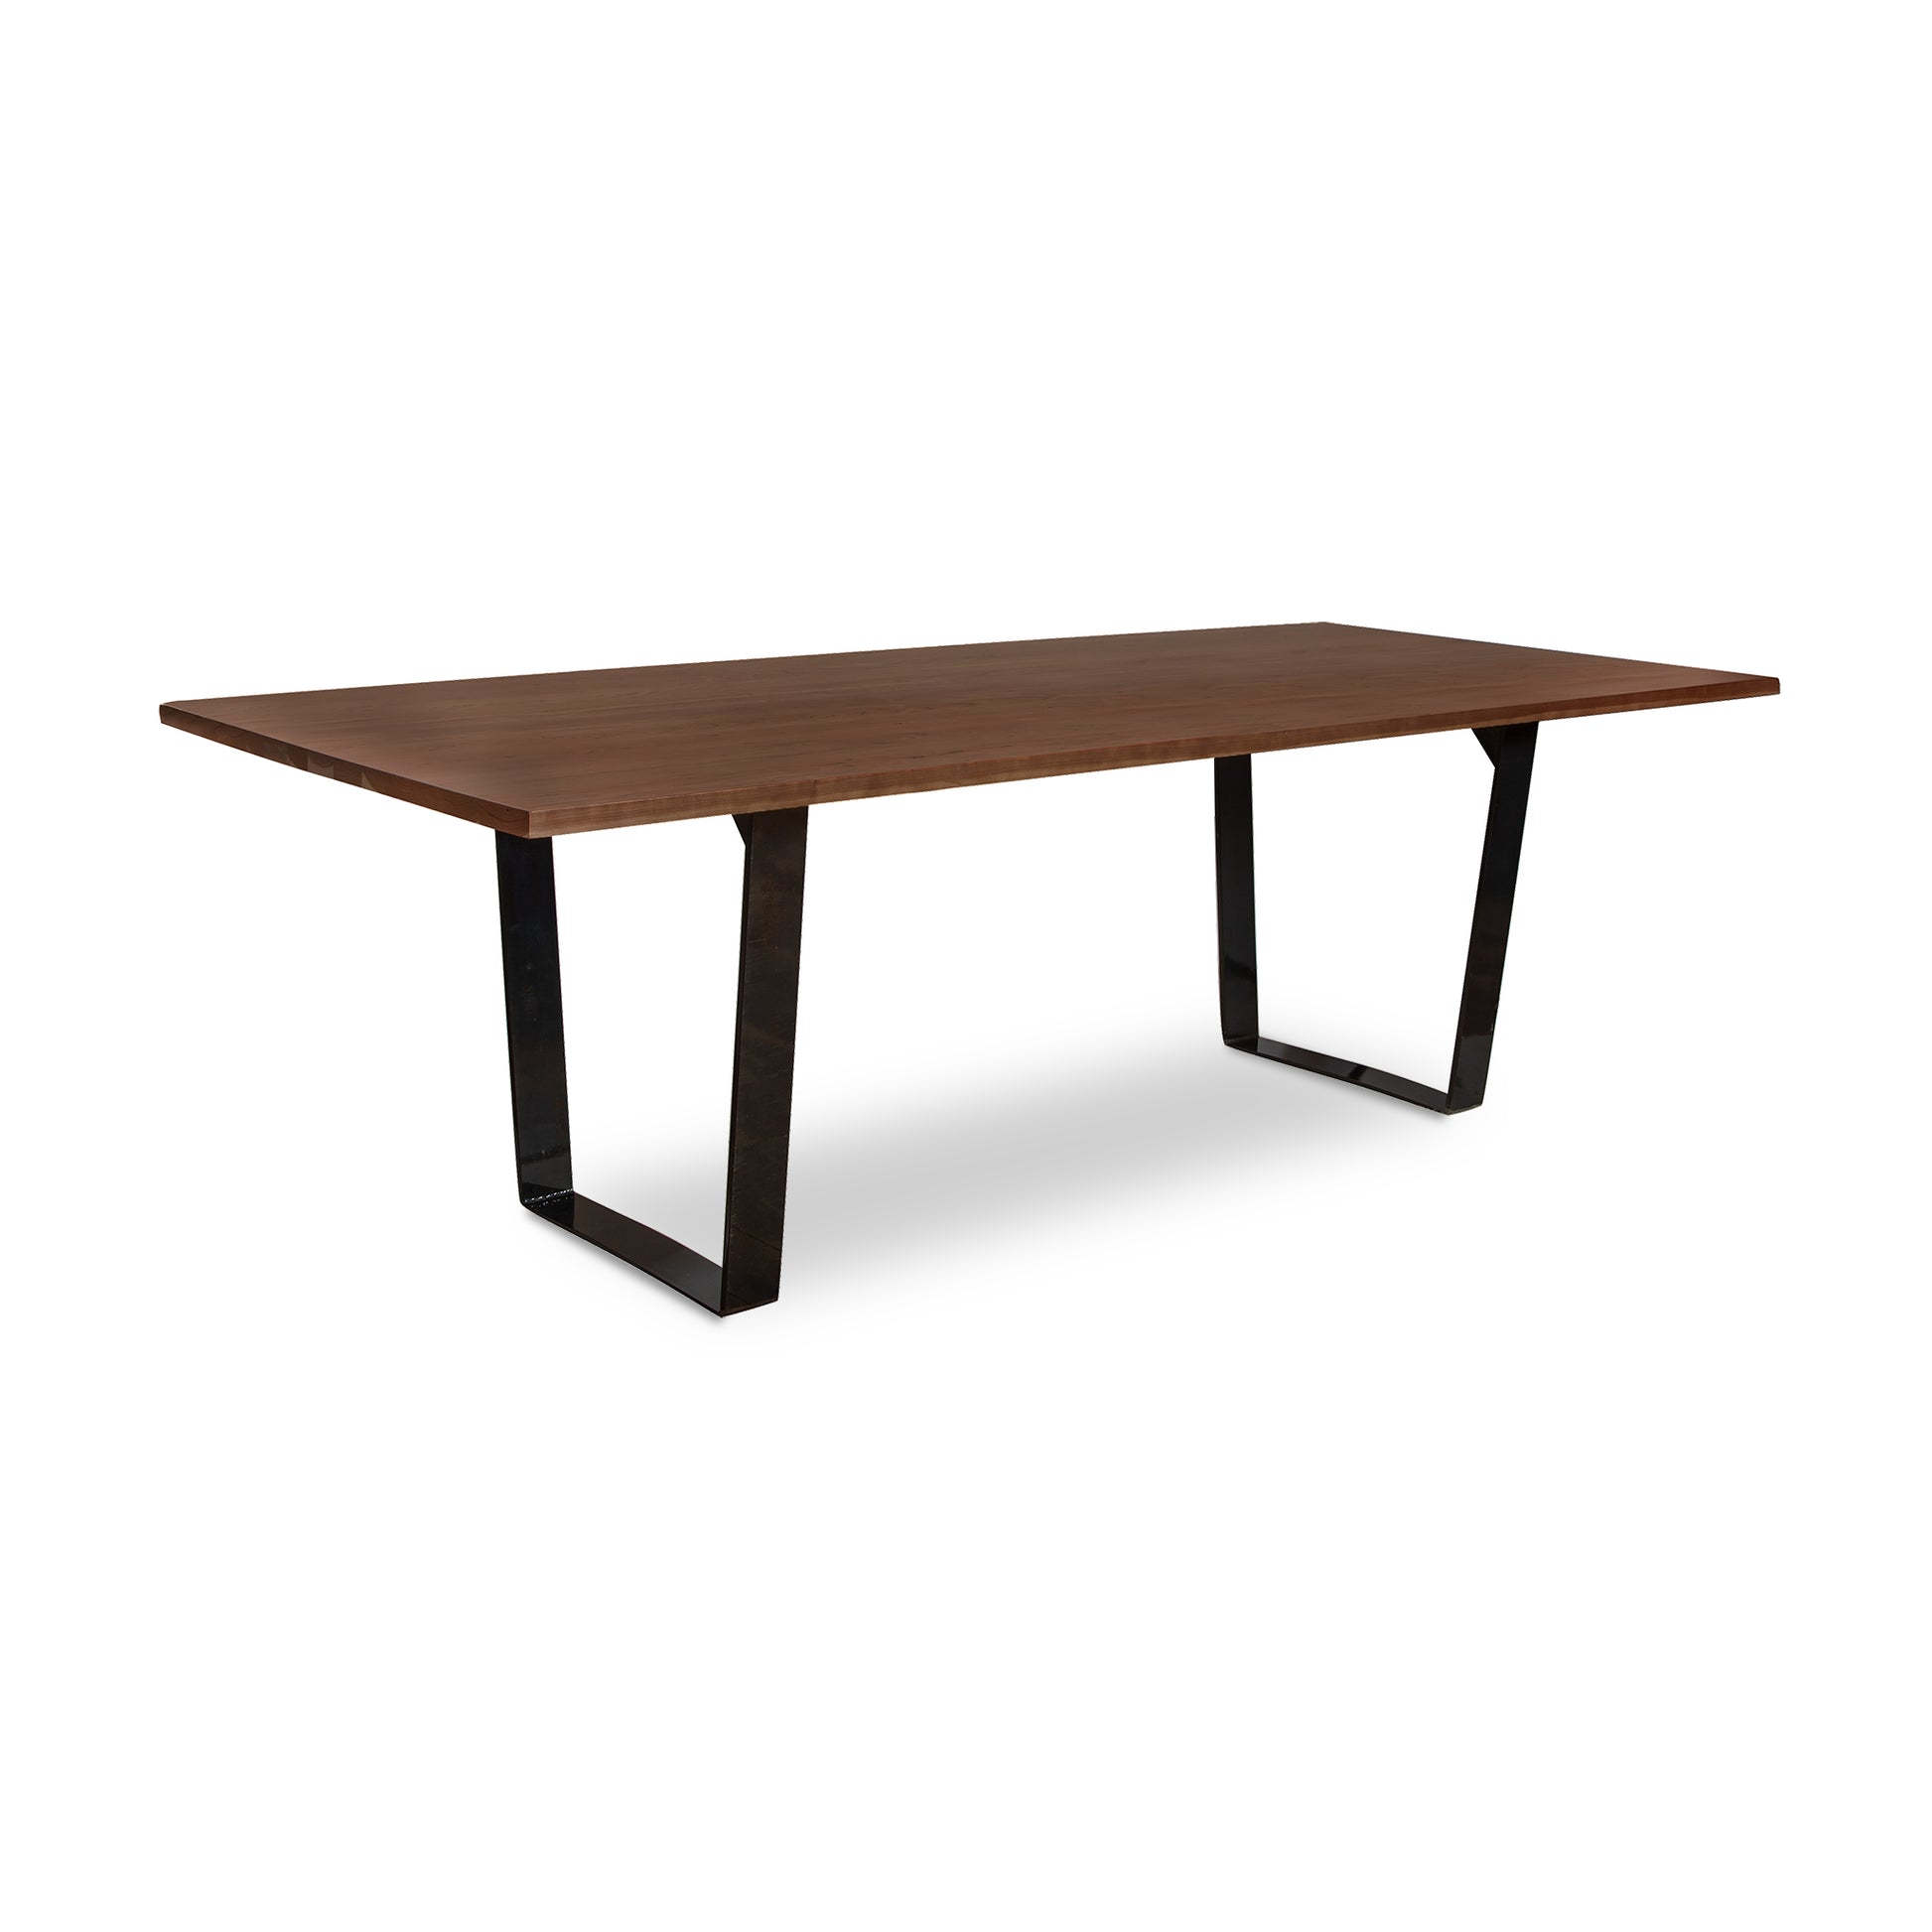 A Metropolitan Solid Top Dining Table from Lyndon Furniture with a wooden top and black legs supported by a metal base.